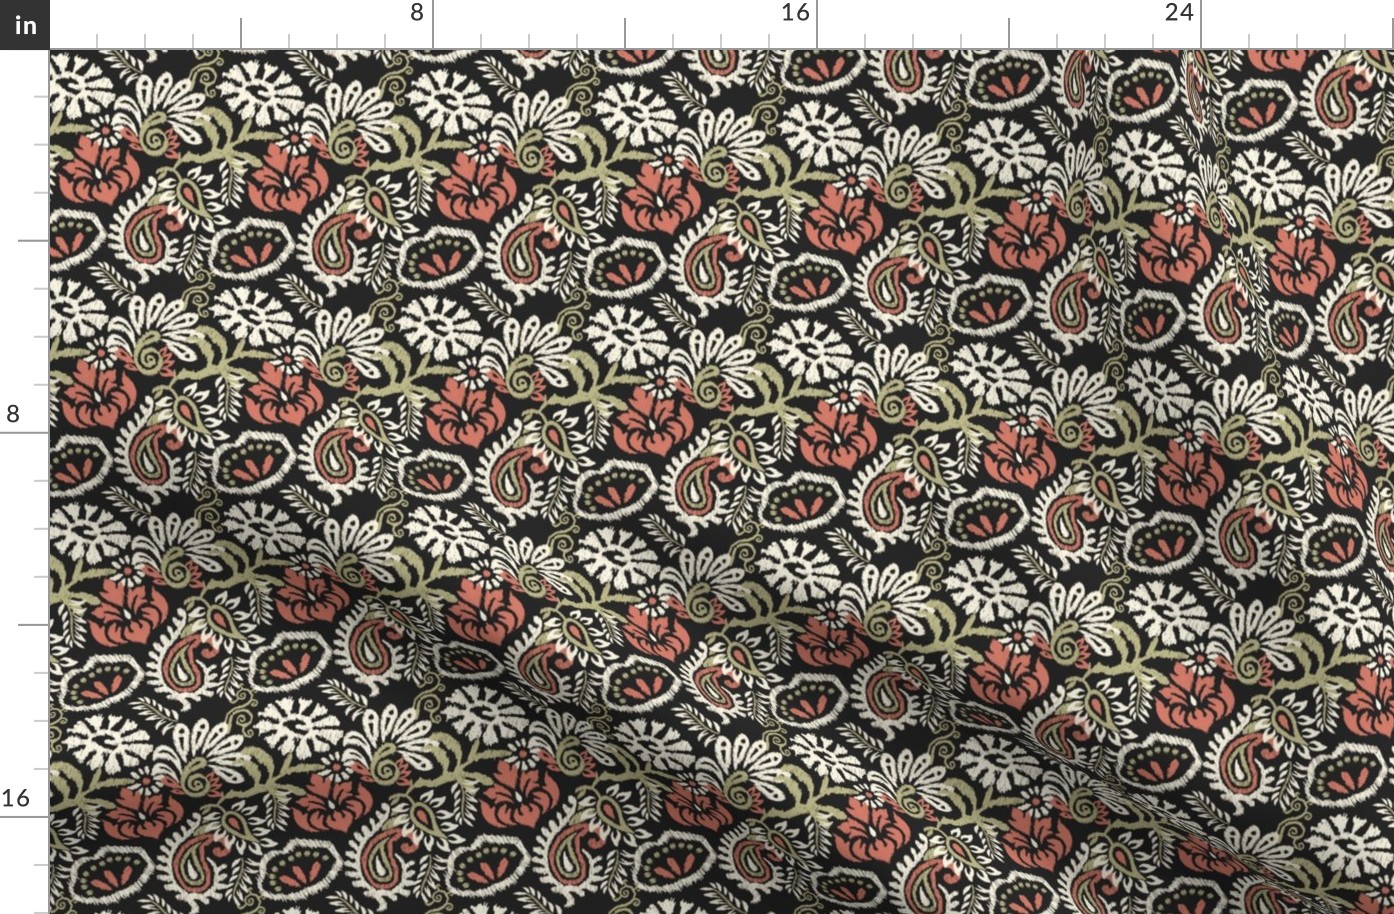 Embroidered Paisley Floral in Ivory, Aged Terra Cotta and Sage Green - Coordinate